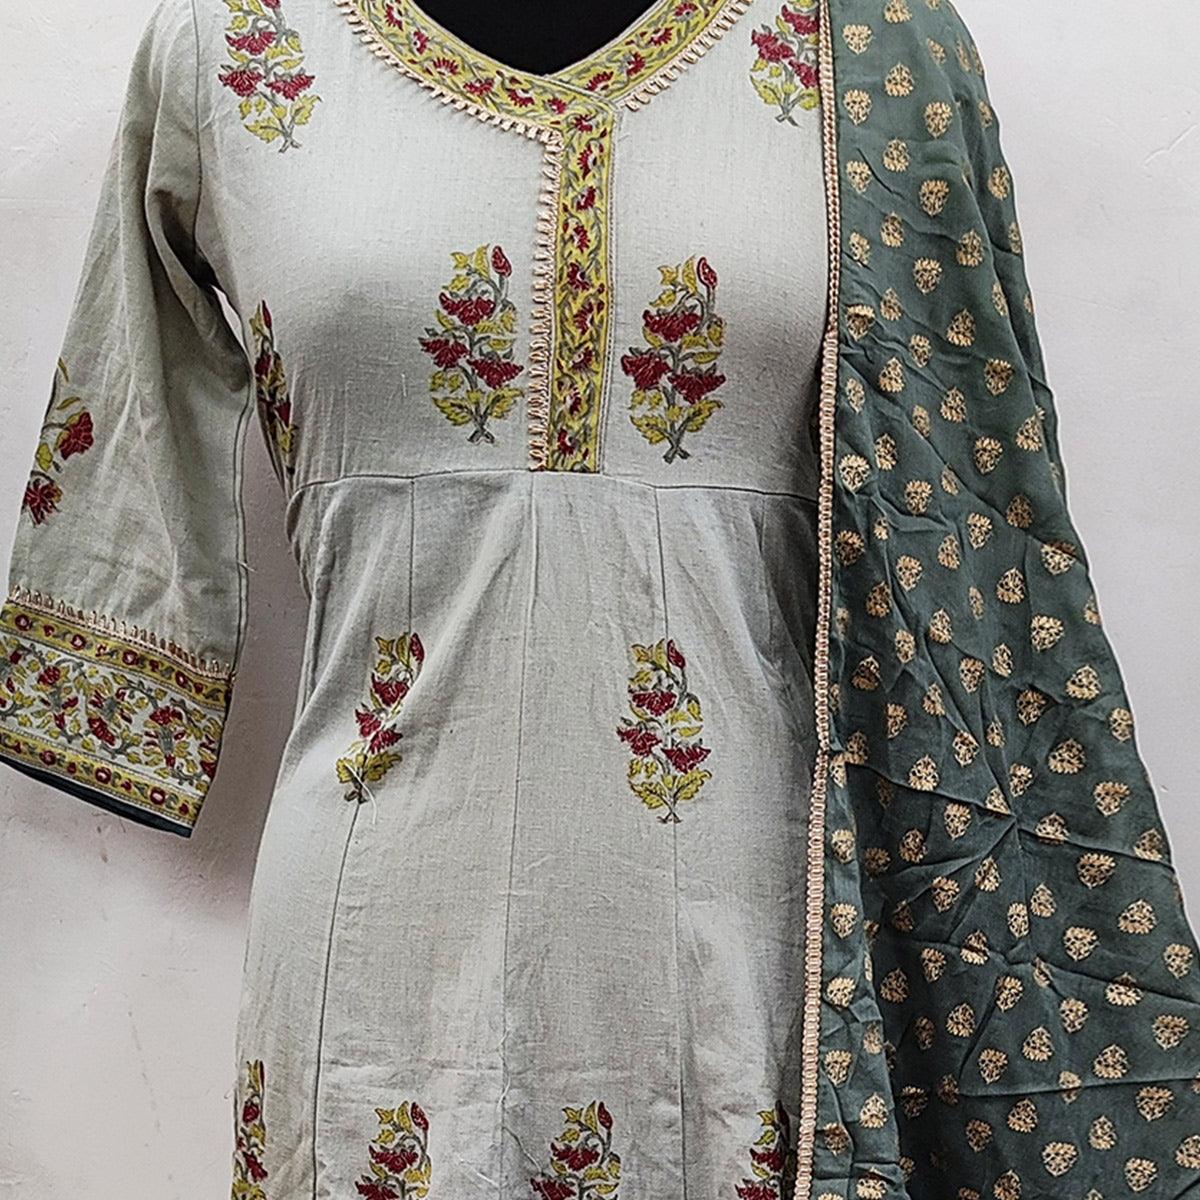 Desirable Grey Colored Party Wear Floral Printed Cotton Anarkali Kurti With Dupatta - Peachmode